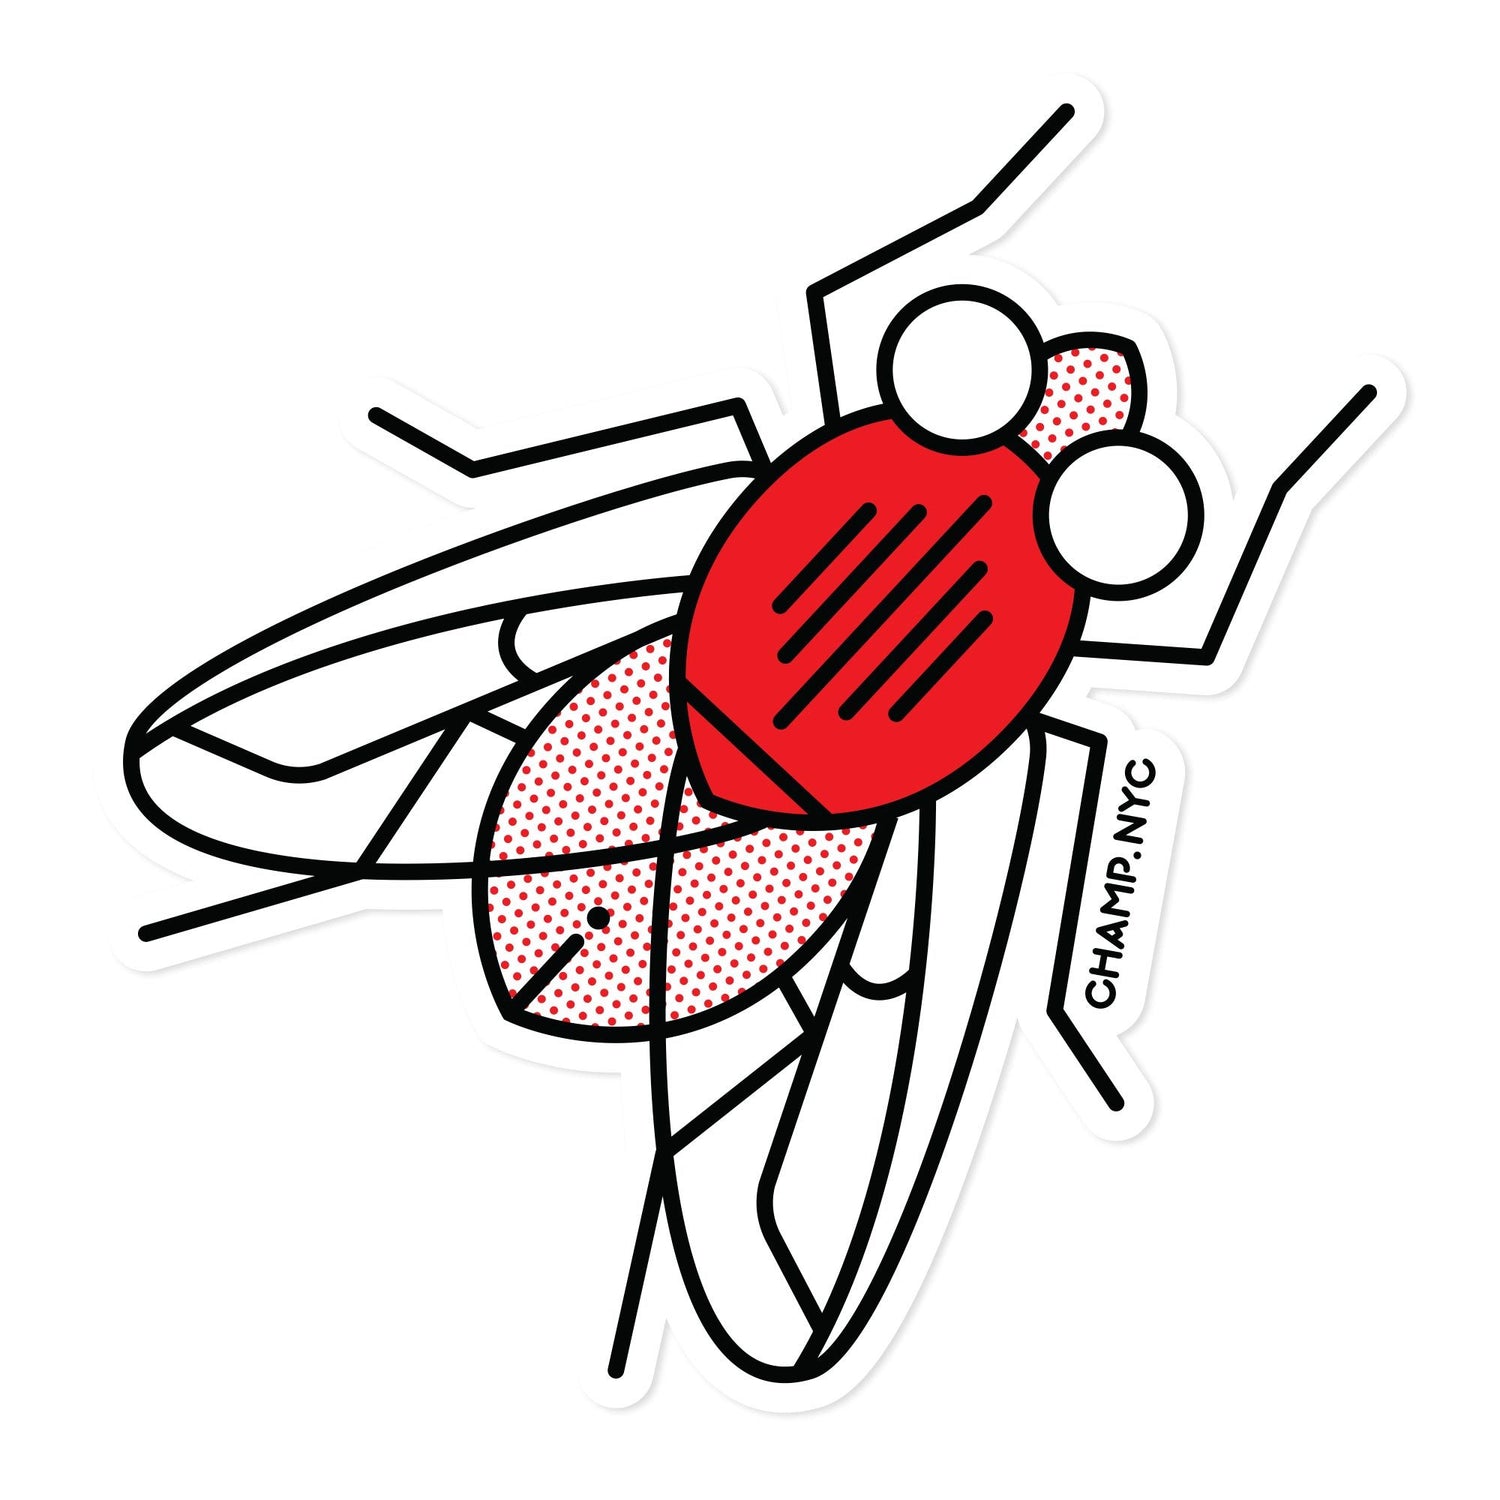 A 5x4" vinyl art sticker of a fly drawn in a flash tattoo and pop art fusion style in a red, white and black color palette by the artist, Red Halftone.